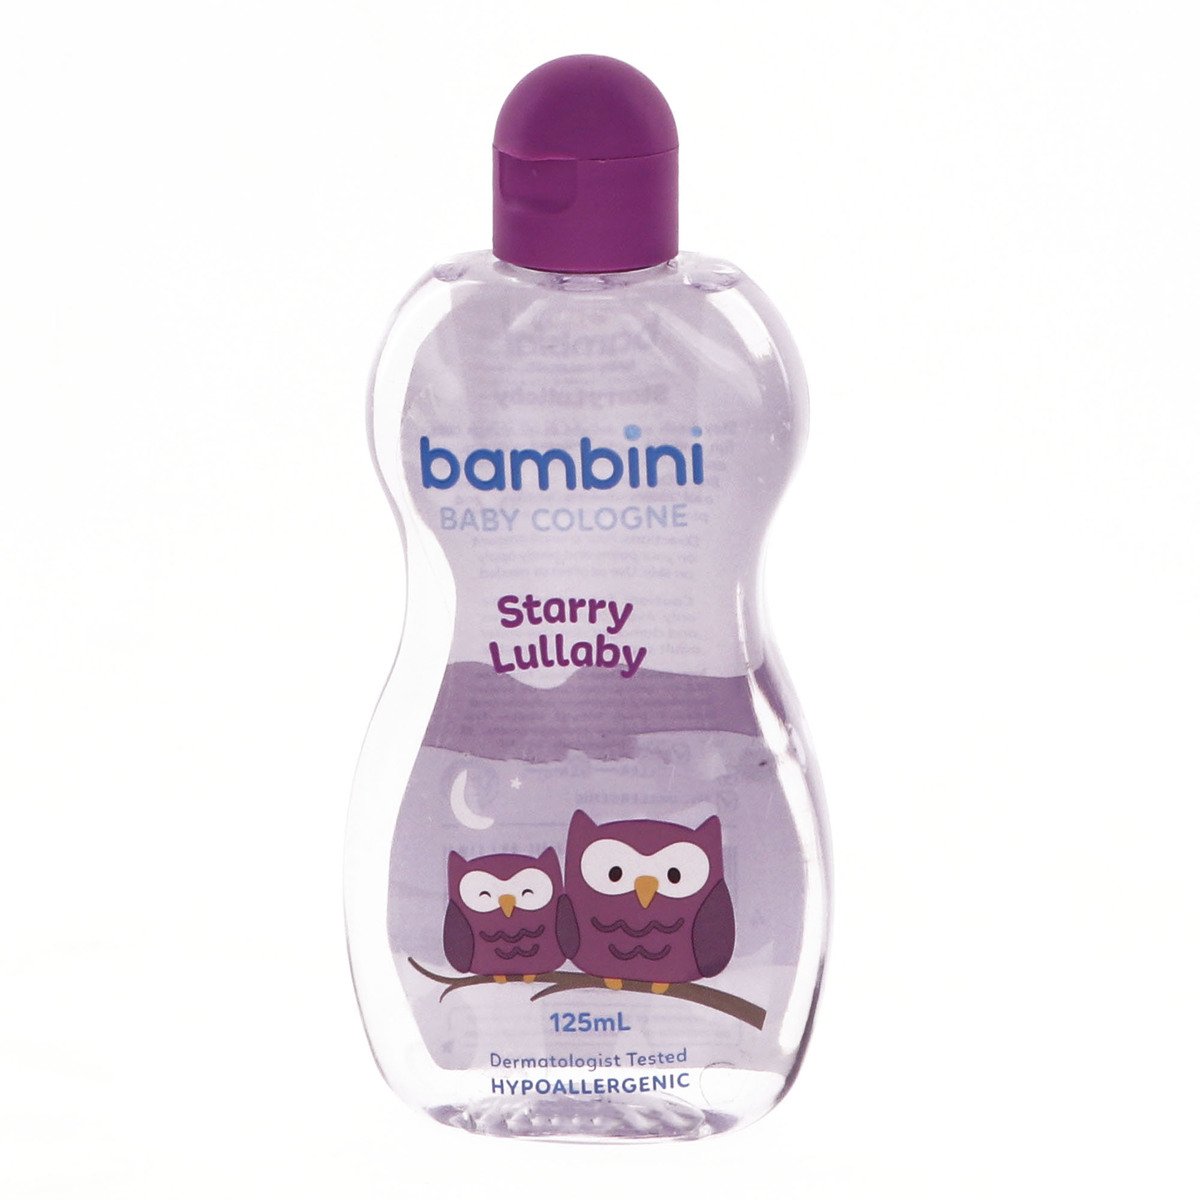 Bambini  Starry Lullaby Baby Cologne 125ml